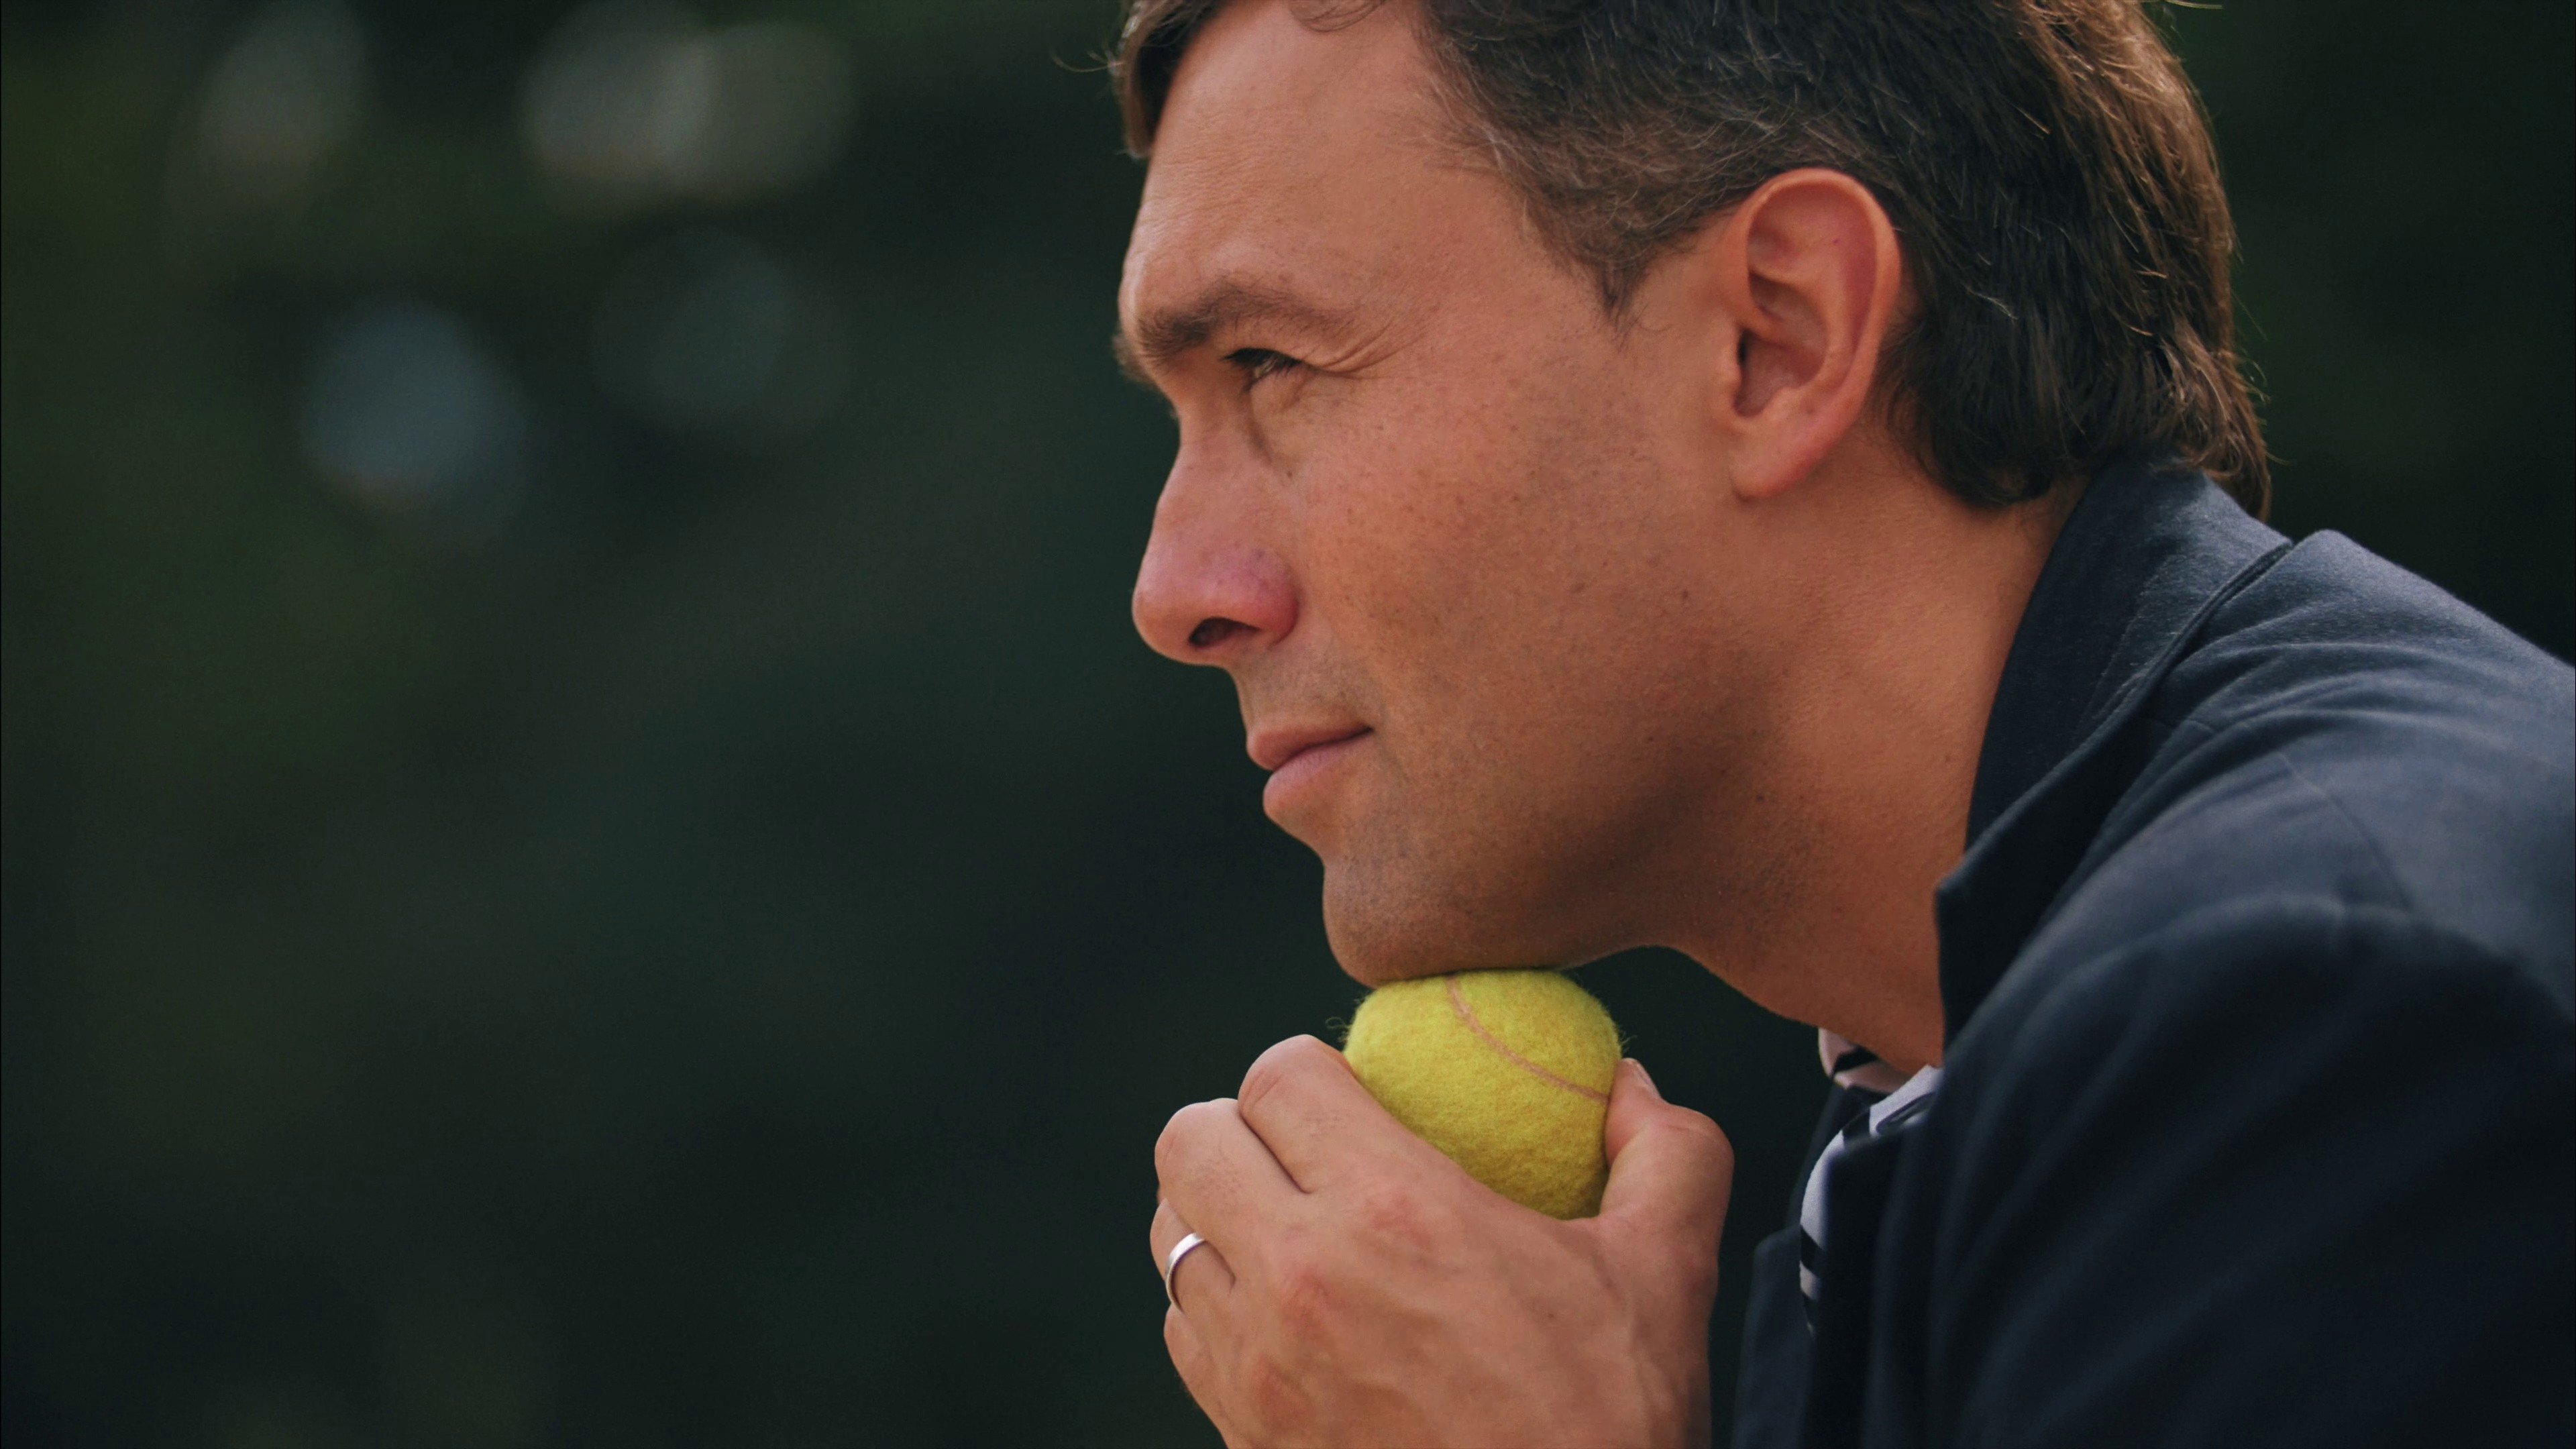 Leon Jakimic, founder and CEO of Lasvit, discovered he had entrepreneurial talent, following a career-ending injury that brought his tennis aspirations to an end. Photo: Handout